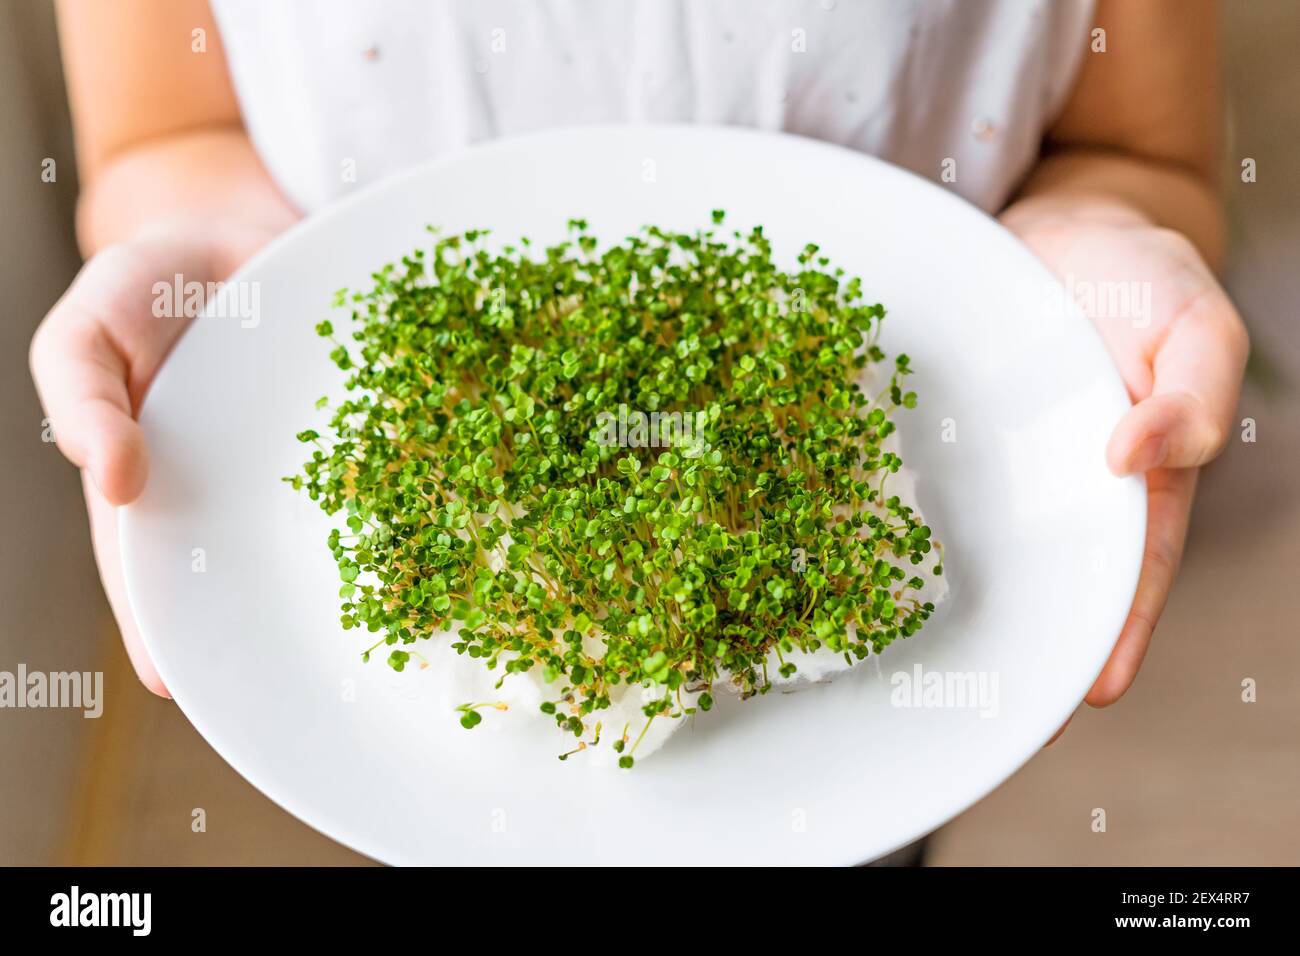 Close-up view of arugula micro greens sprouts. Girl hands holding white ceramic plate with fresh micro greens shoots. Shallow depth of field. Stock Photo